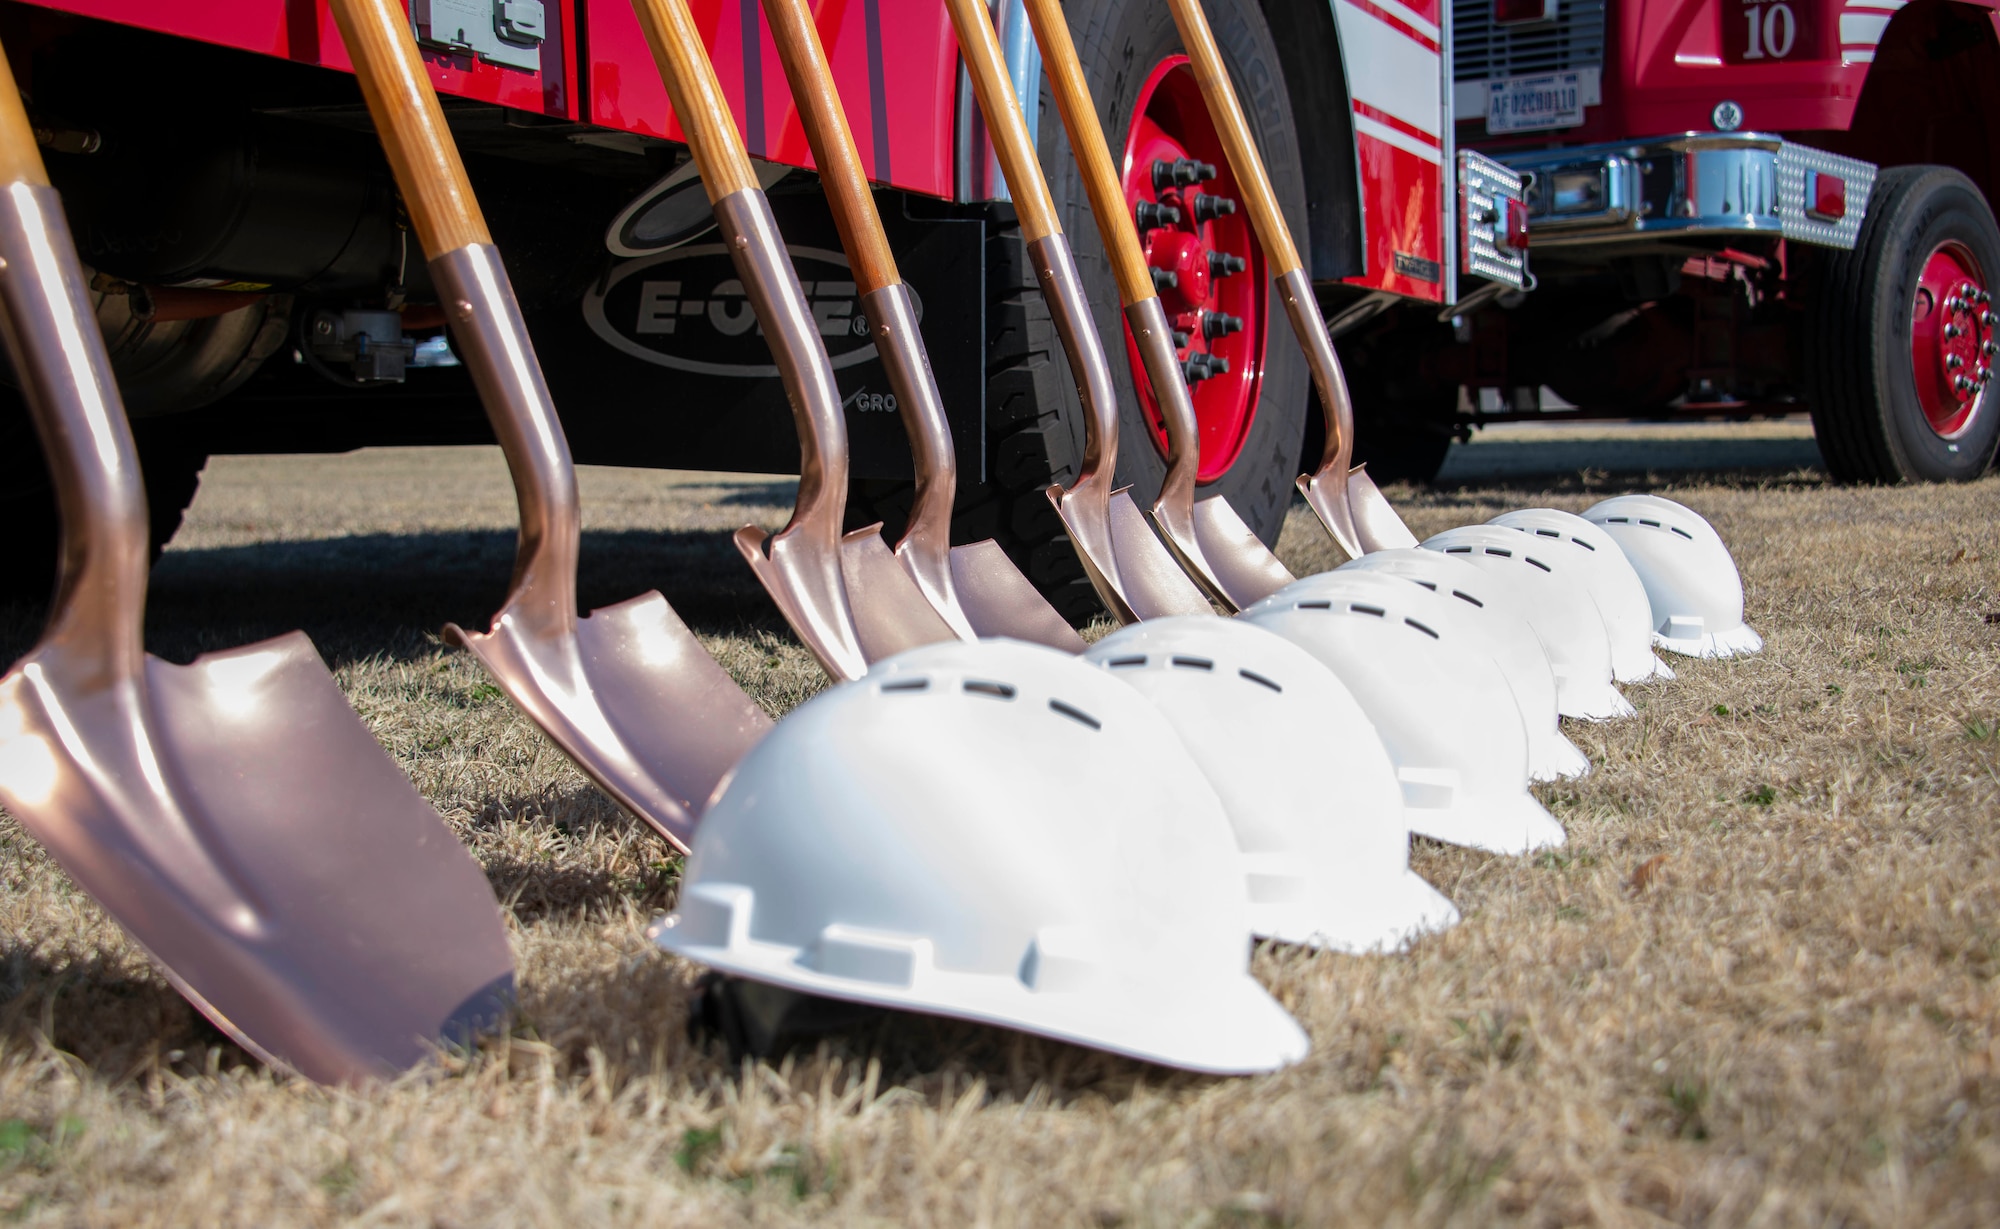 Shovels and helmets are displayed at the Fire Rescue Center ground breaking ceremony at Altus Air Force Base, Oklahoma, Jan. 26, 2021. The shovels and helmets were given to the 97th Air Mobility Wing leadership team and distinguished guests who used them to perform the "first dig." (U.S. Air Force photo by Airman 1st Class Amanda Lovelace)